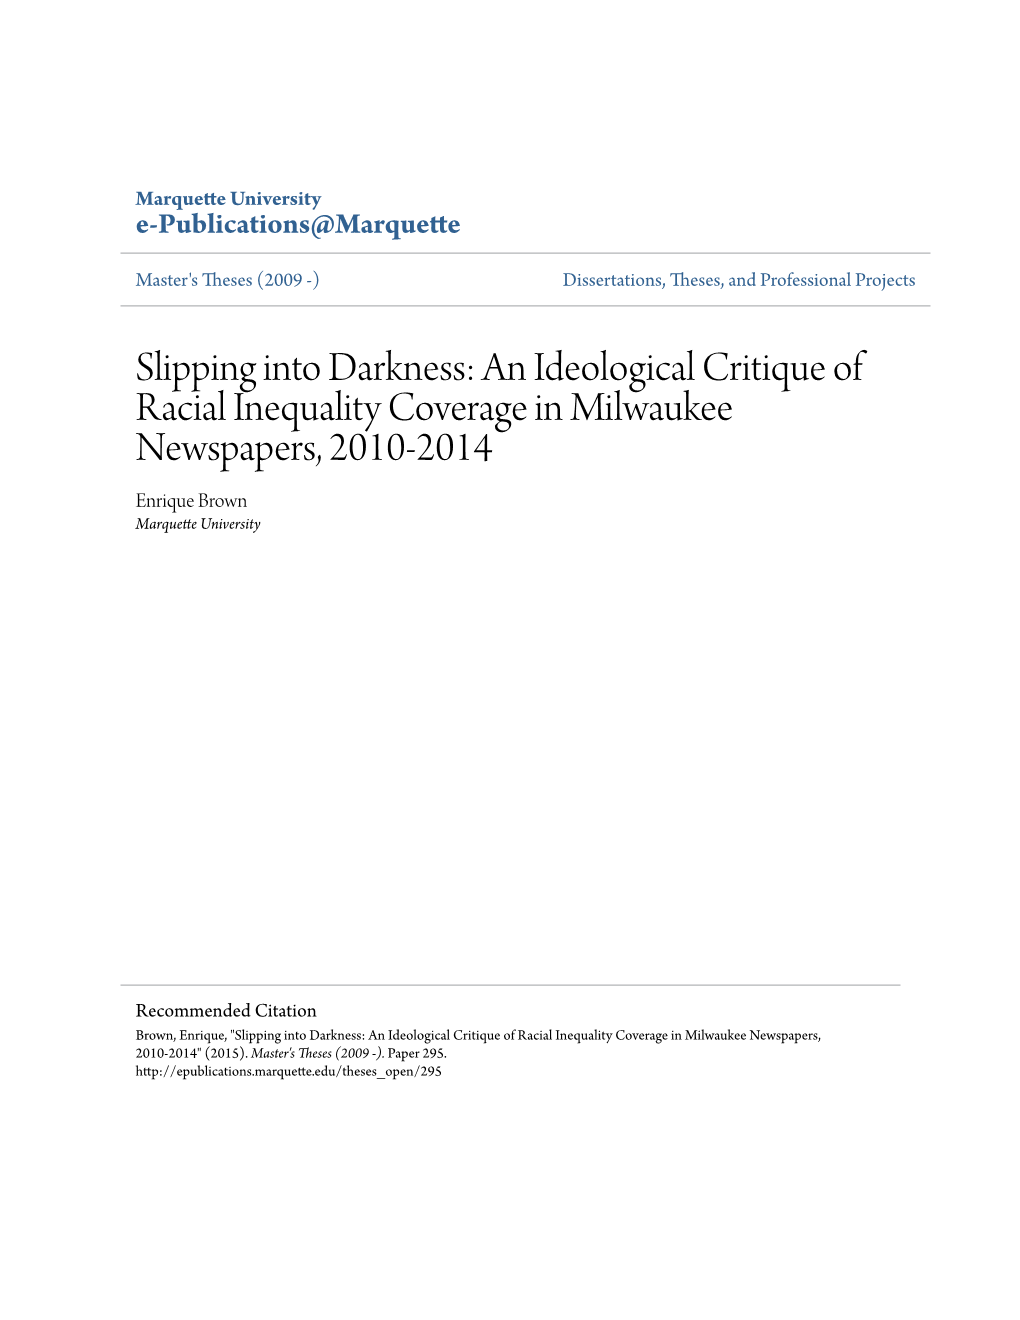 An Ideological Critique of Racial Inequality Coverage in Milwaukee Newspapers, 2010-2014 Enrique Brown Marquette University